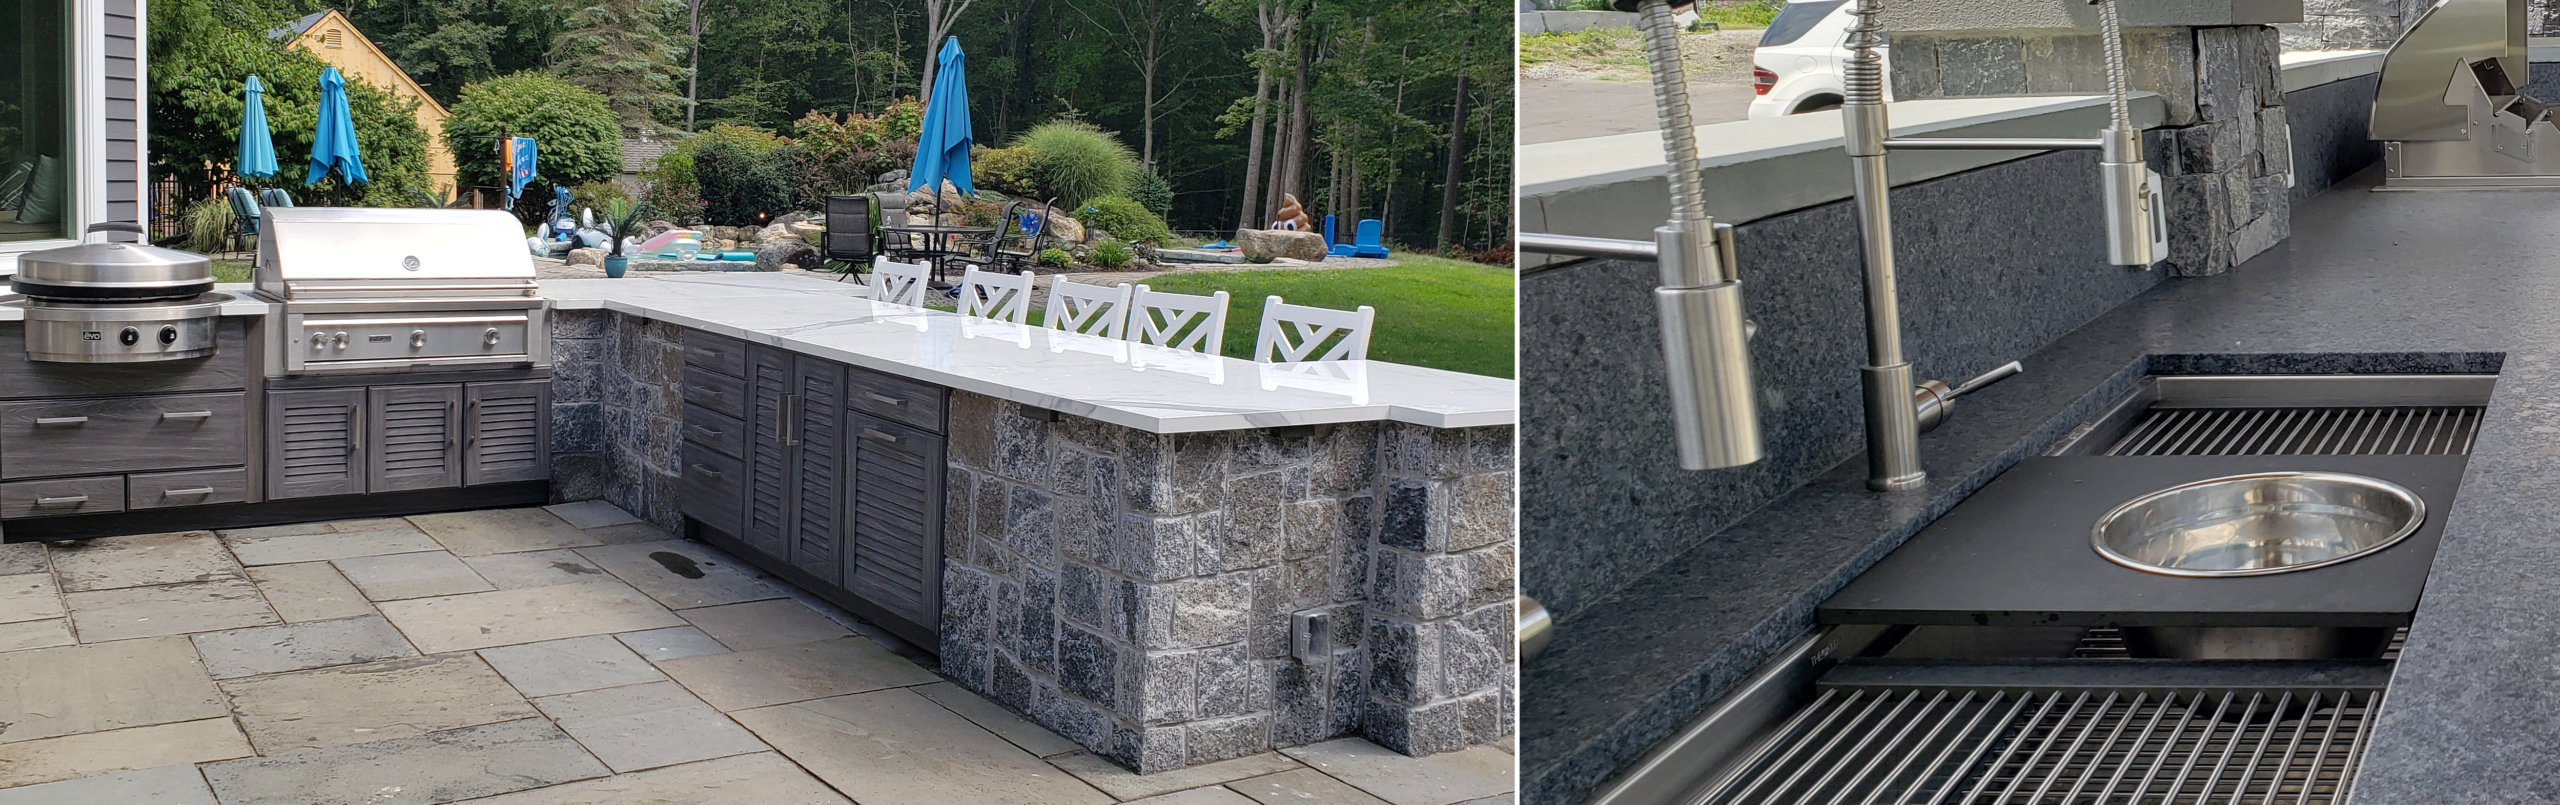 Outdoor kitchen installed by Outdoor Kitchen Design Store, which can come with or without Galley sink (right). 